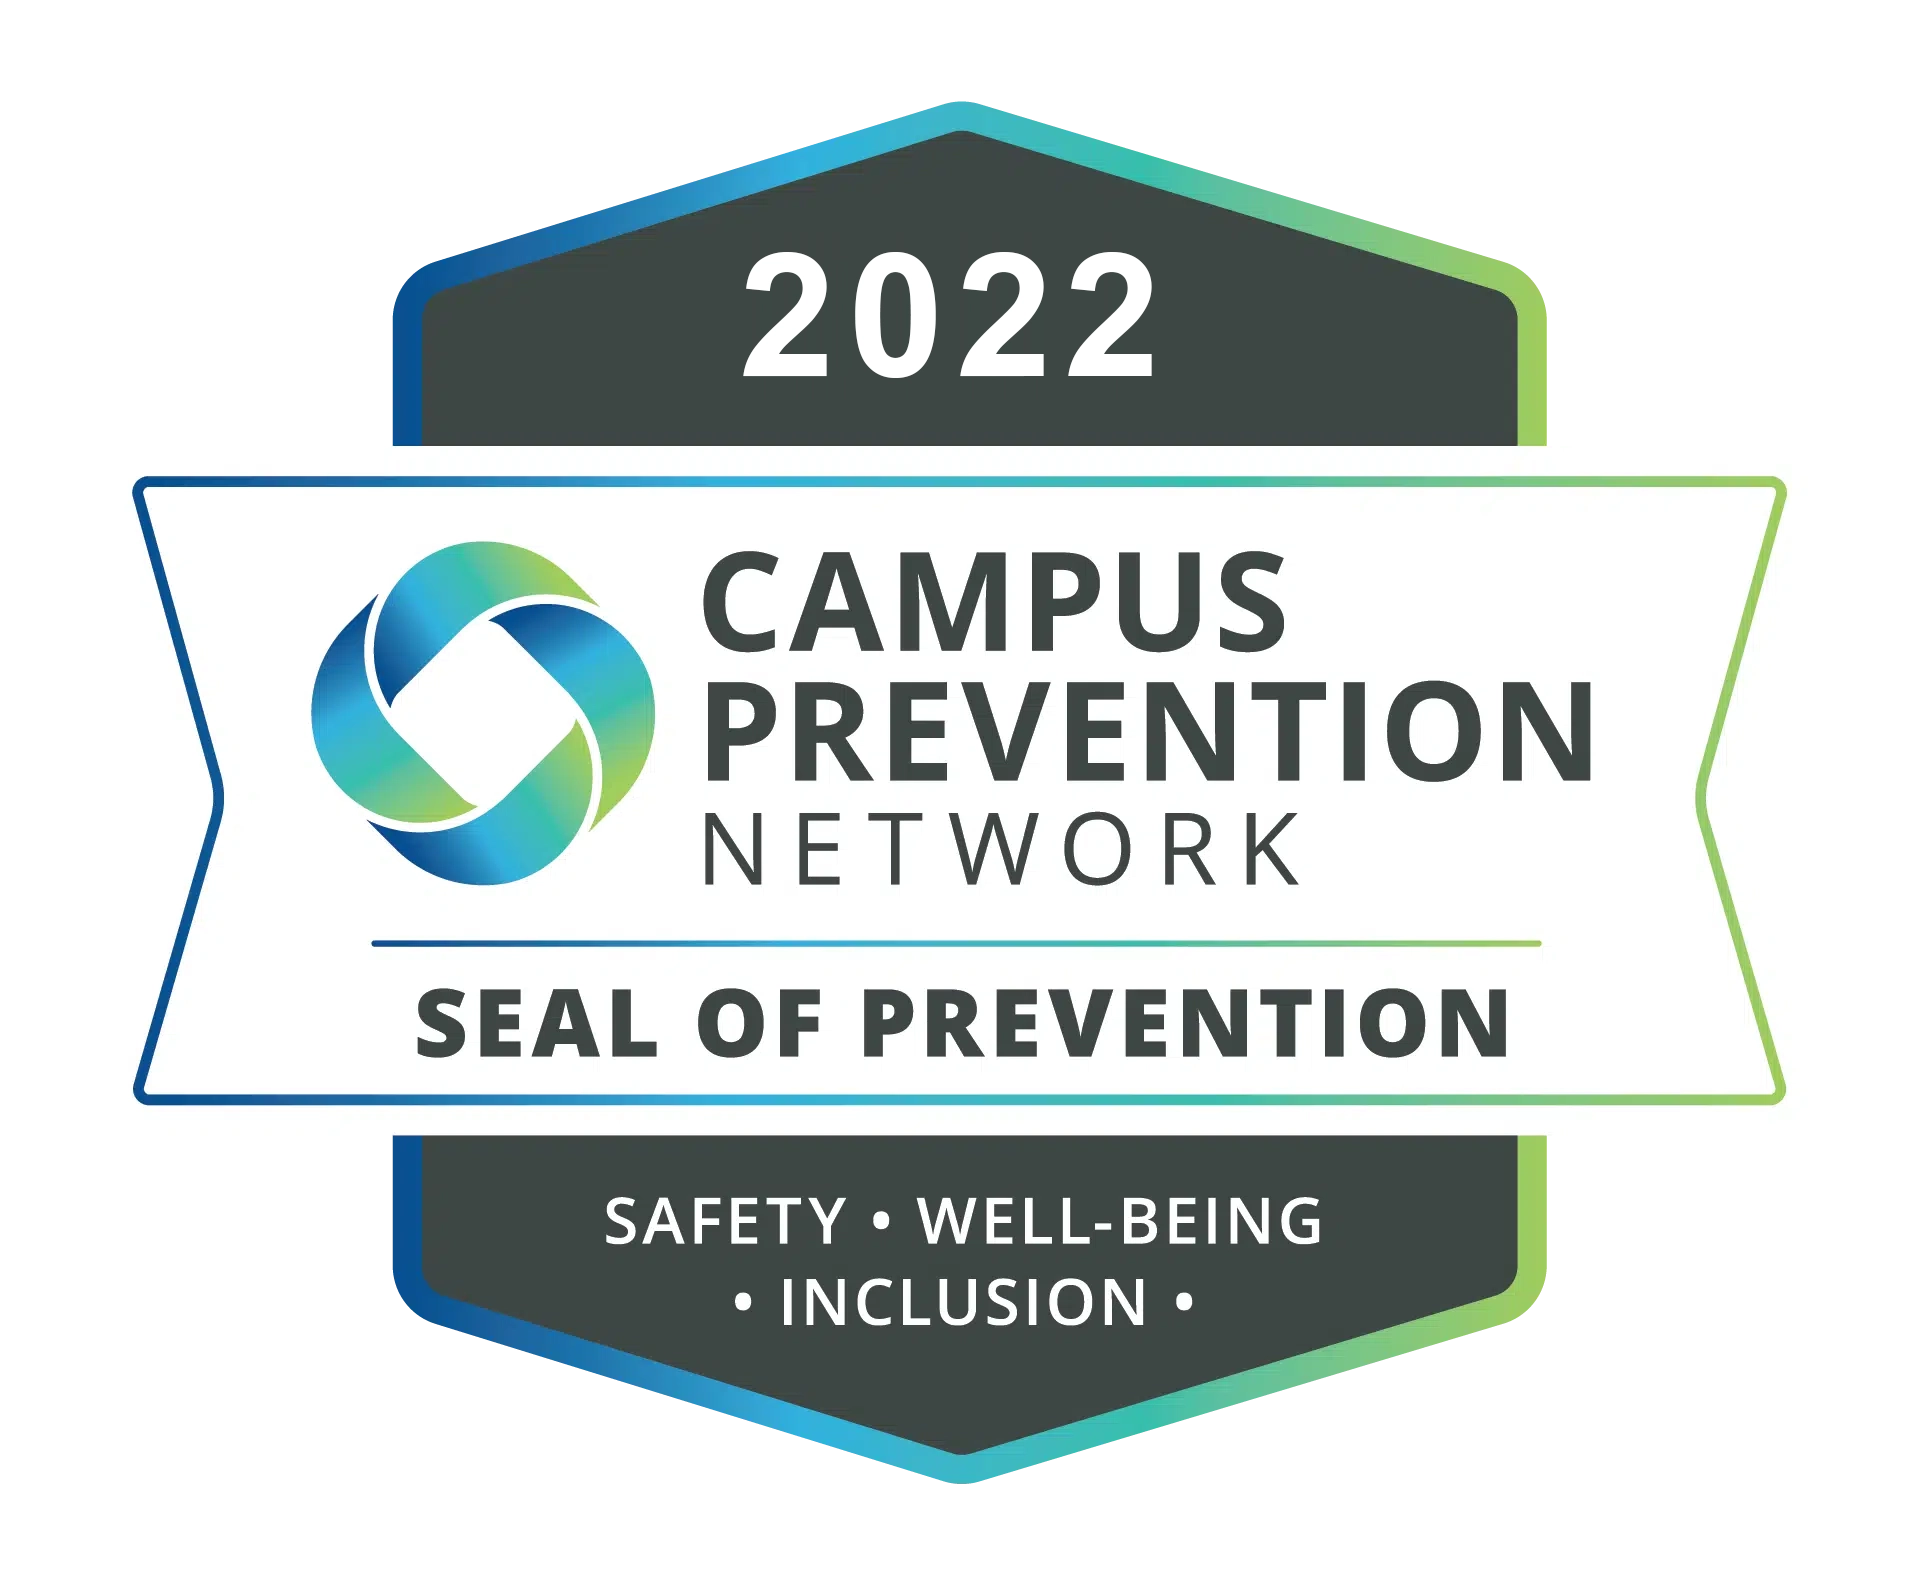 2022 Campus Prevention Network: Seal of Prevention - Safety, Well-being, Inclusion